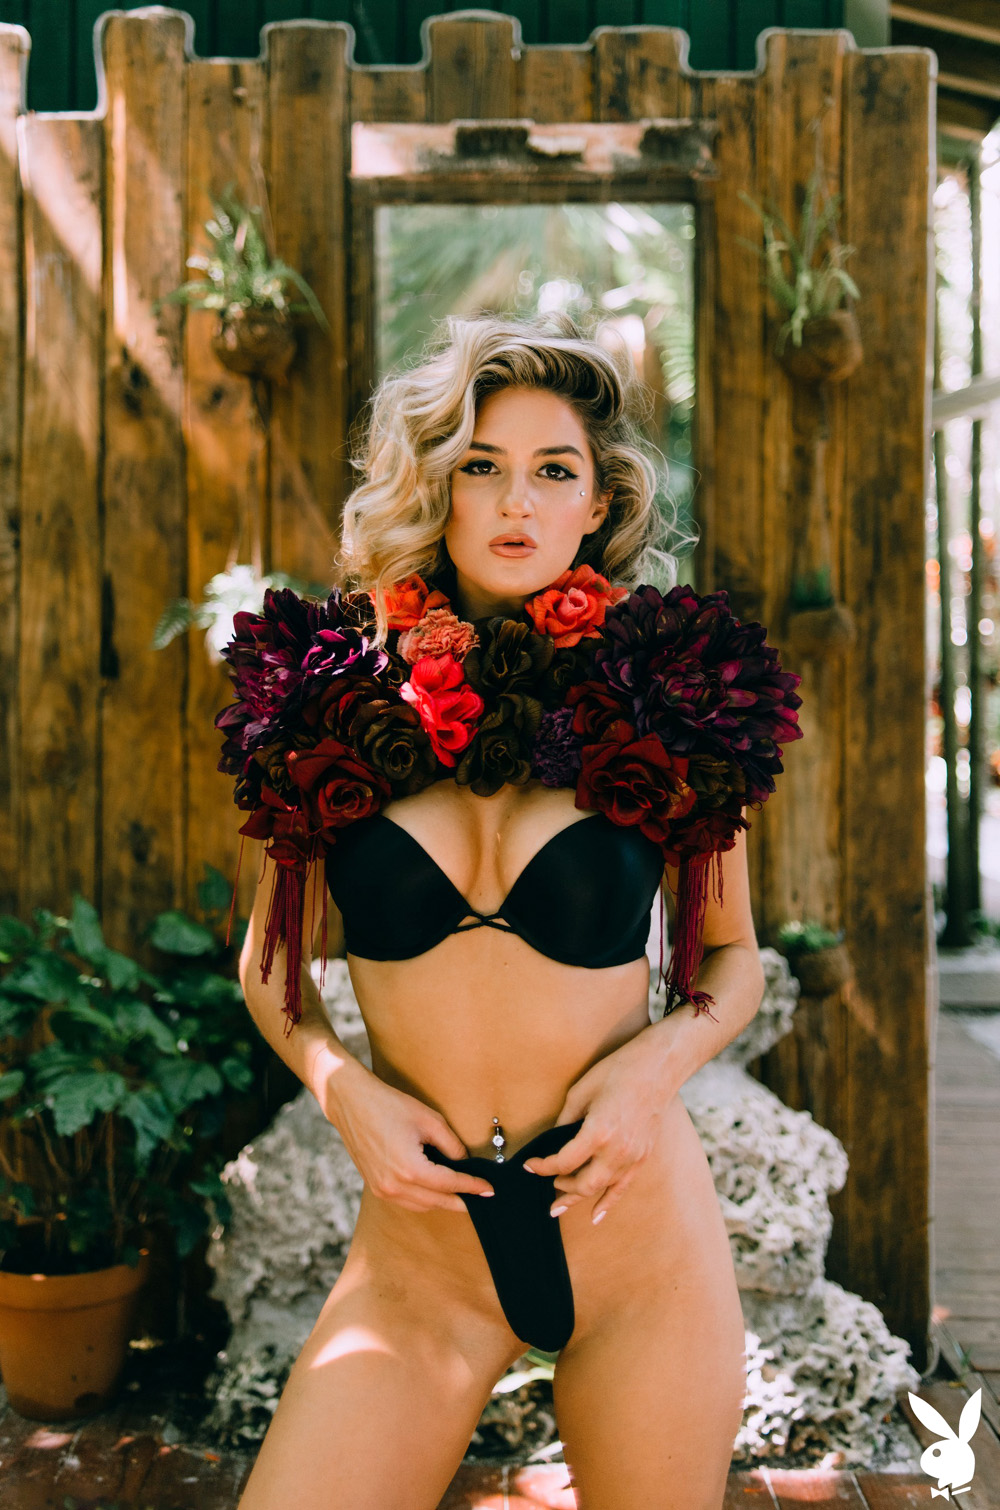 Kayci Darko exposes her perfect curves among the lush palm trees